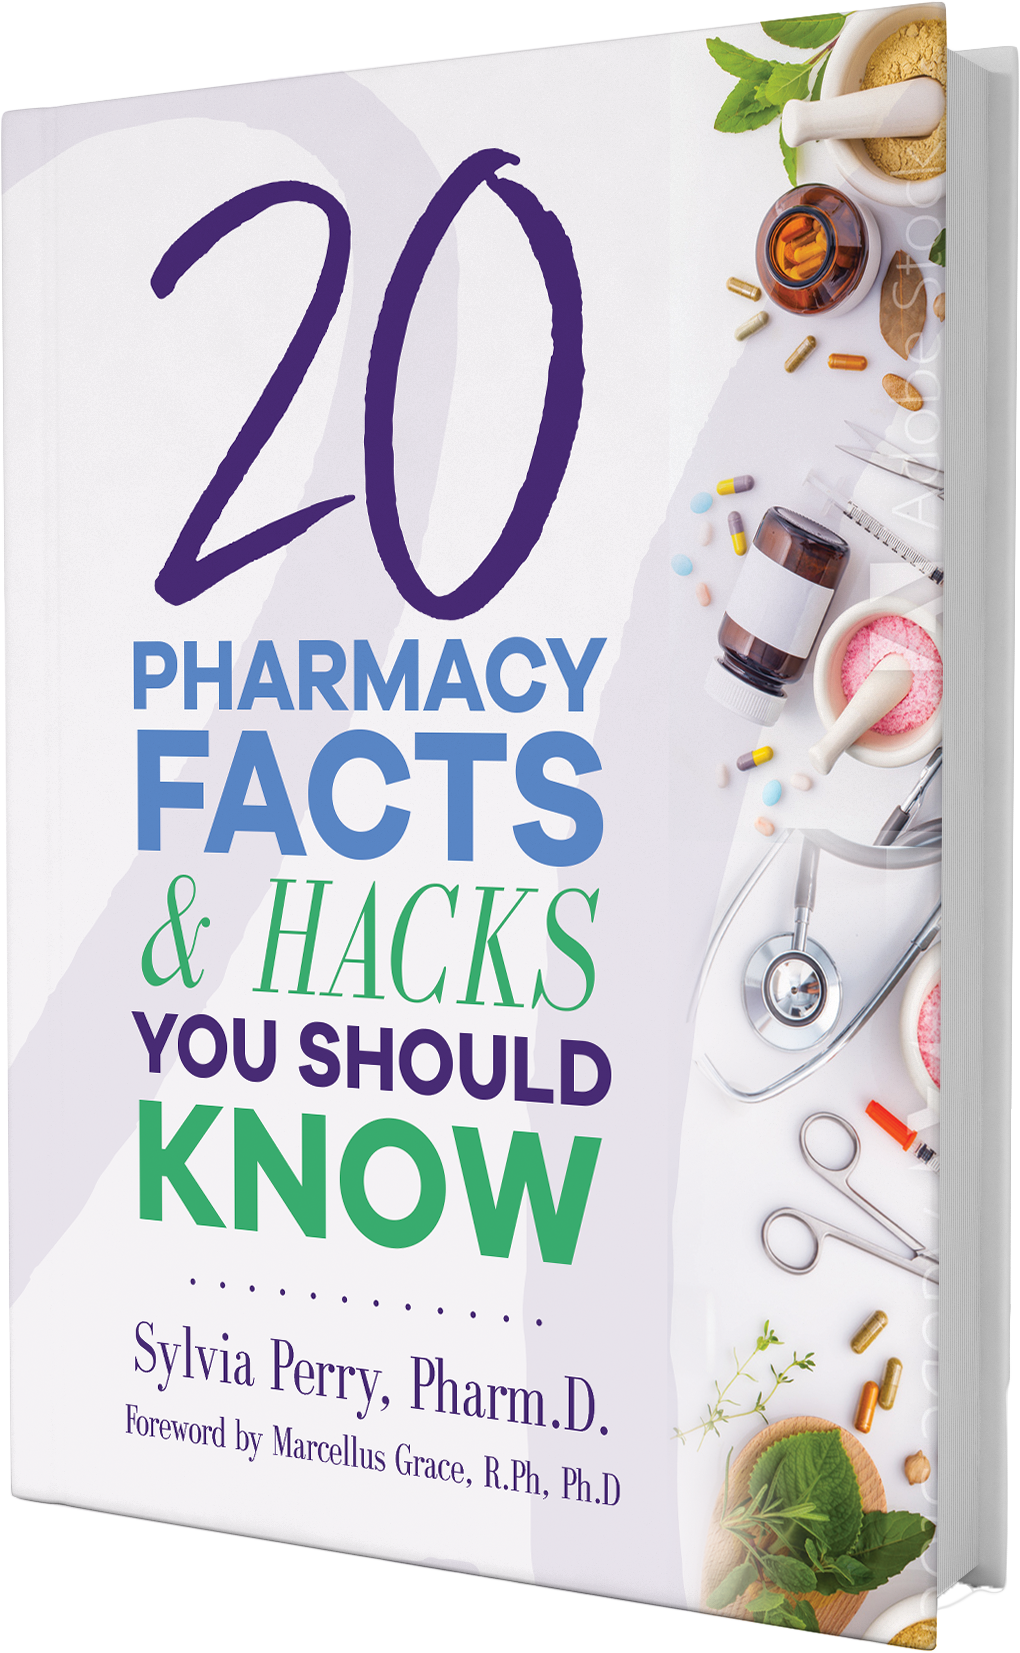 Pharmacist and Bestselling Author Releases Book Focused on Empowering Patients